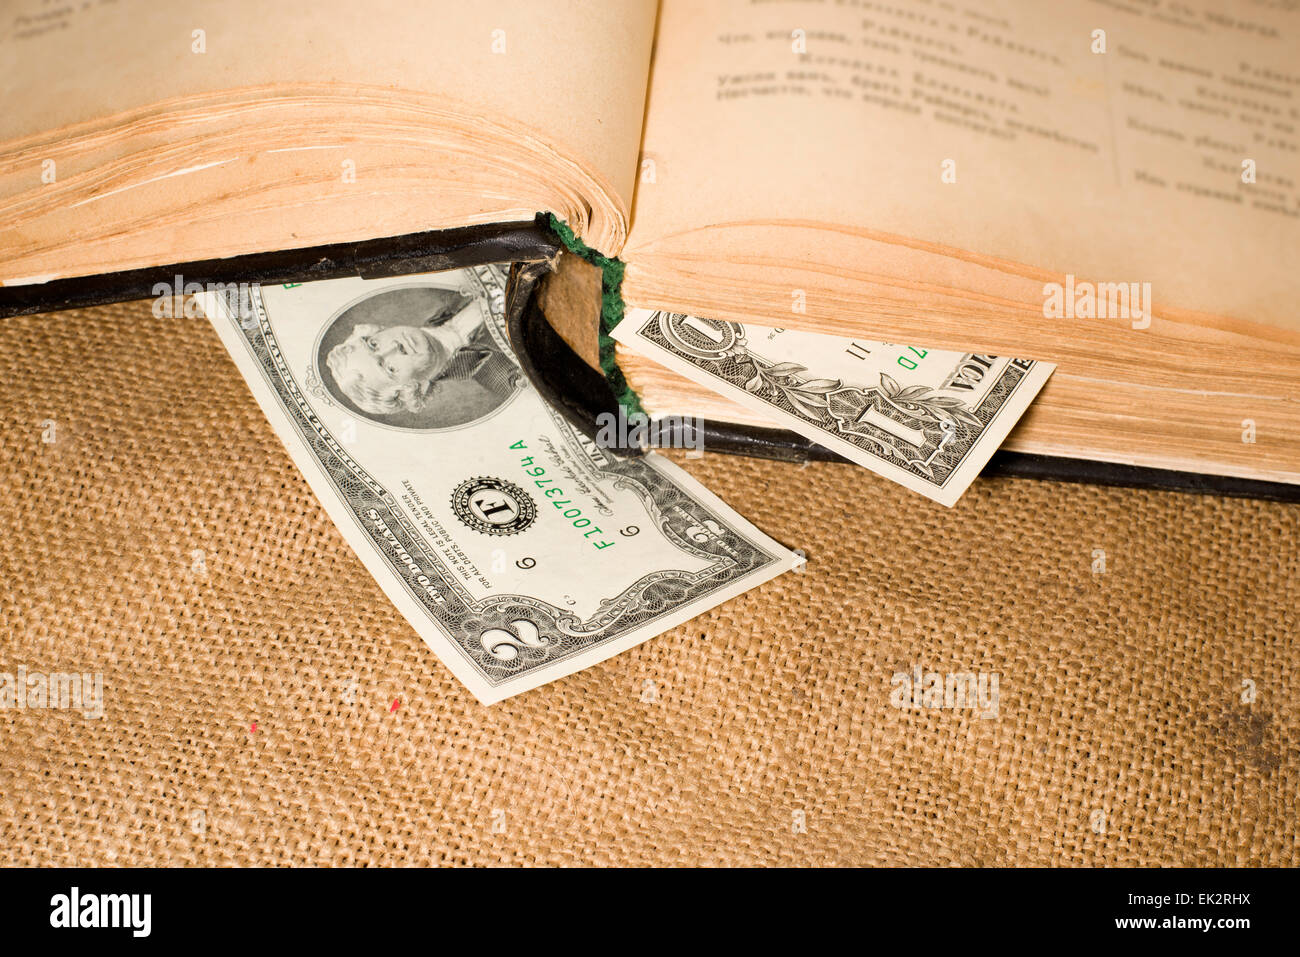 Open book with a bookmark from $ 1 on sacking Stock Photo